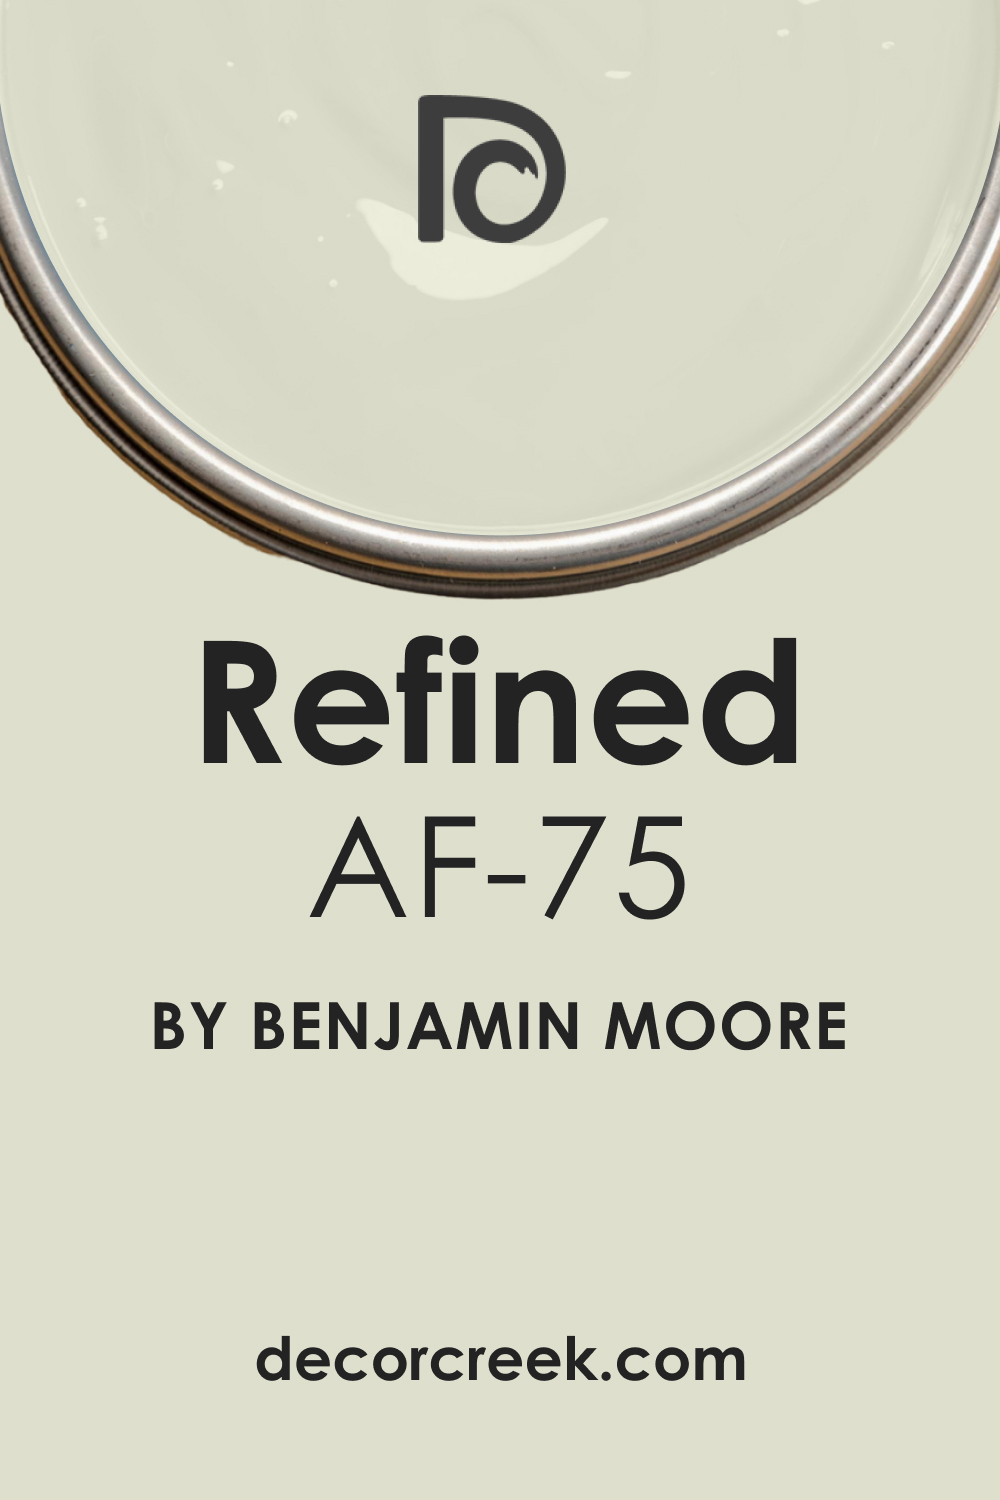 What Color Is Refined AF-75?